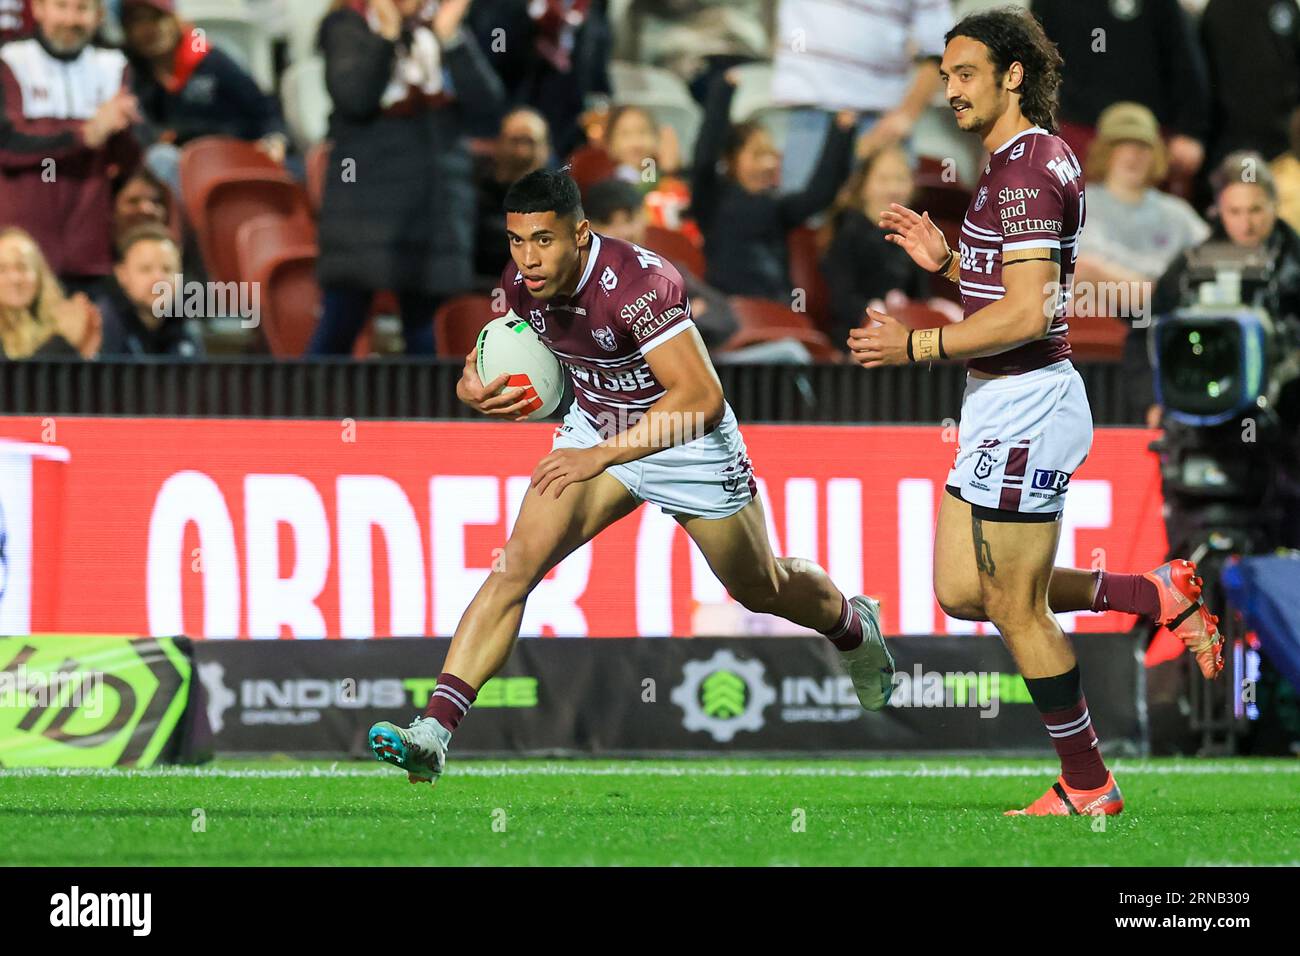 https://c8.alamy.com/comp/2RNB309/sydney-australia-01st-sep-2023-tolutau-koula-of-the-sea-eagles-on-his-way-to-scoring-a-try-during-the-nrl-round-27-match-between-the-manly-warringah-sea-eagles-and-the-wests-tigers-at-4-pines-park-in-sydney-friday-september-1-2023-aap-imagemark-evans-no-archiving-editorial-use-only-credit-australian-associated-pressalamy-live-news-2RNB309.jpg